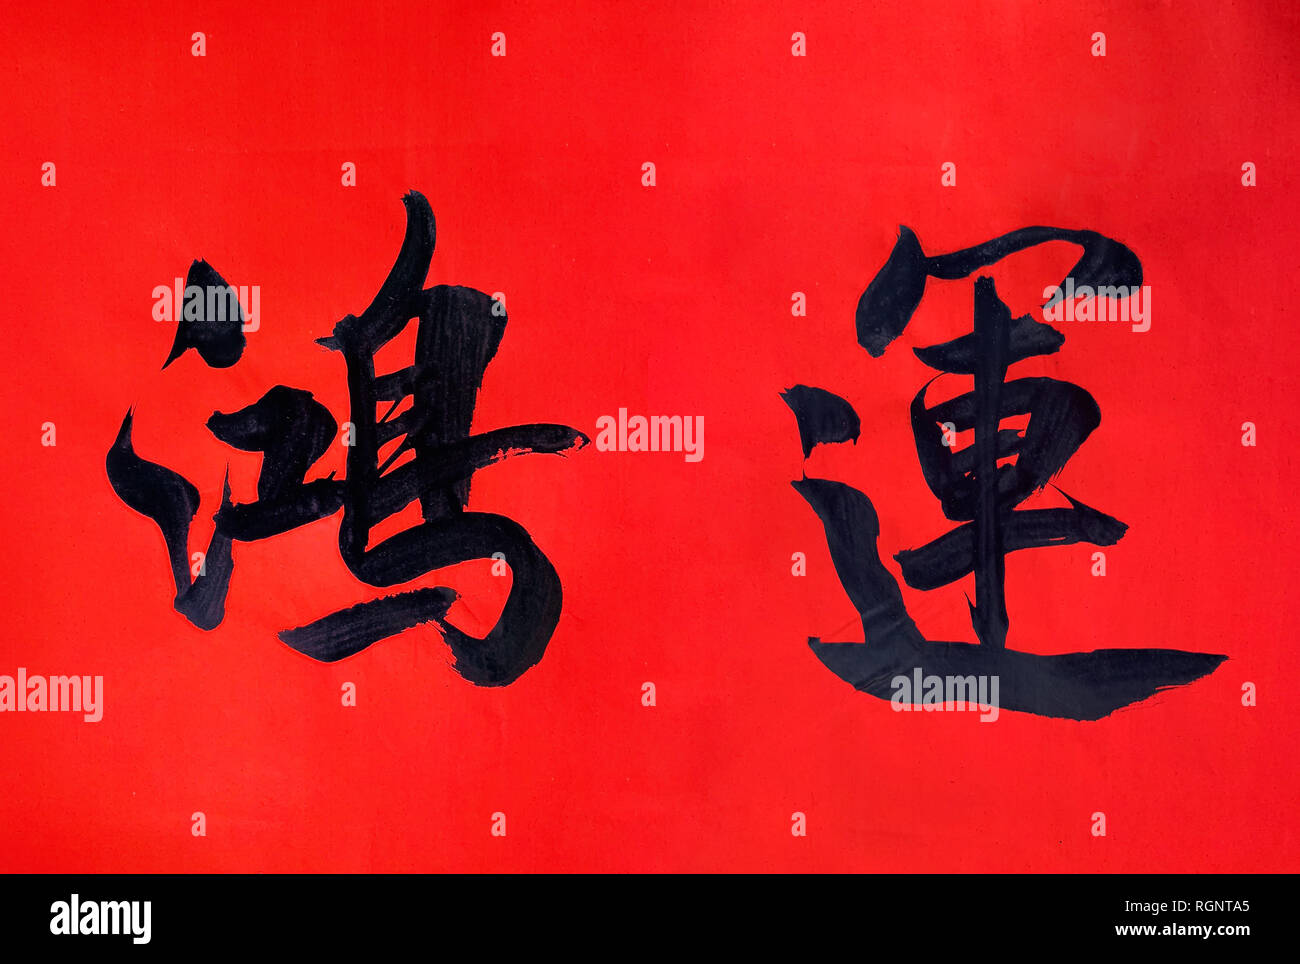 Handwriting Chinese character on red rice paper to celebrate the Chinese New Year. Chinese meaning - fortune and good luck, typically symbol or blessi Stock Photo